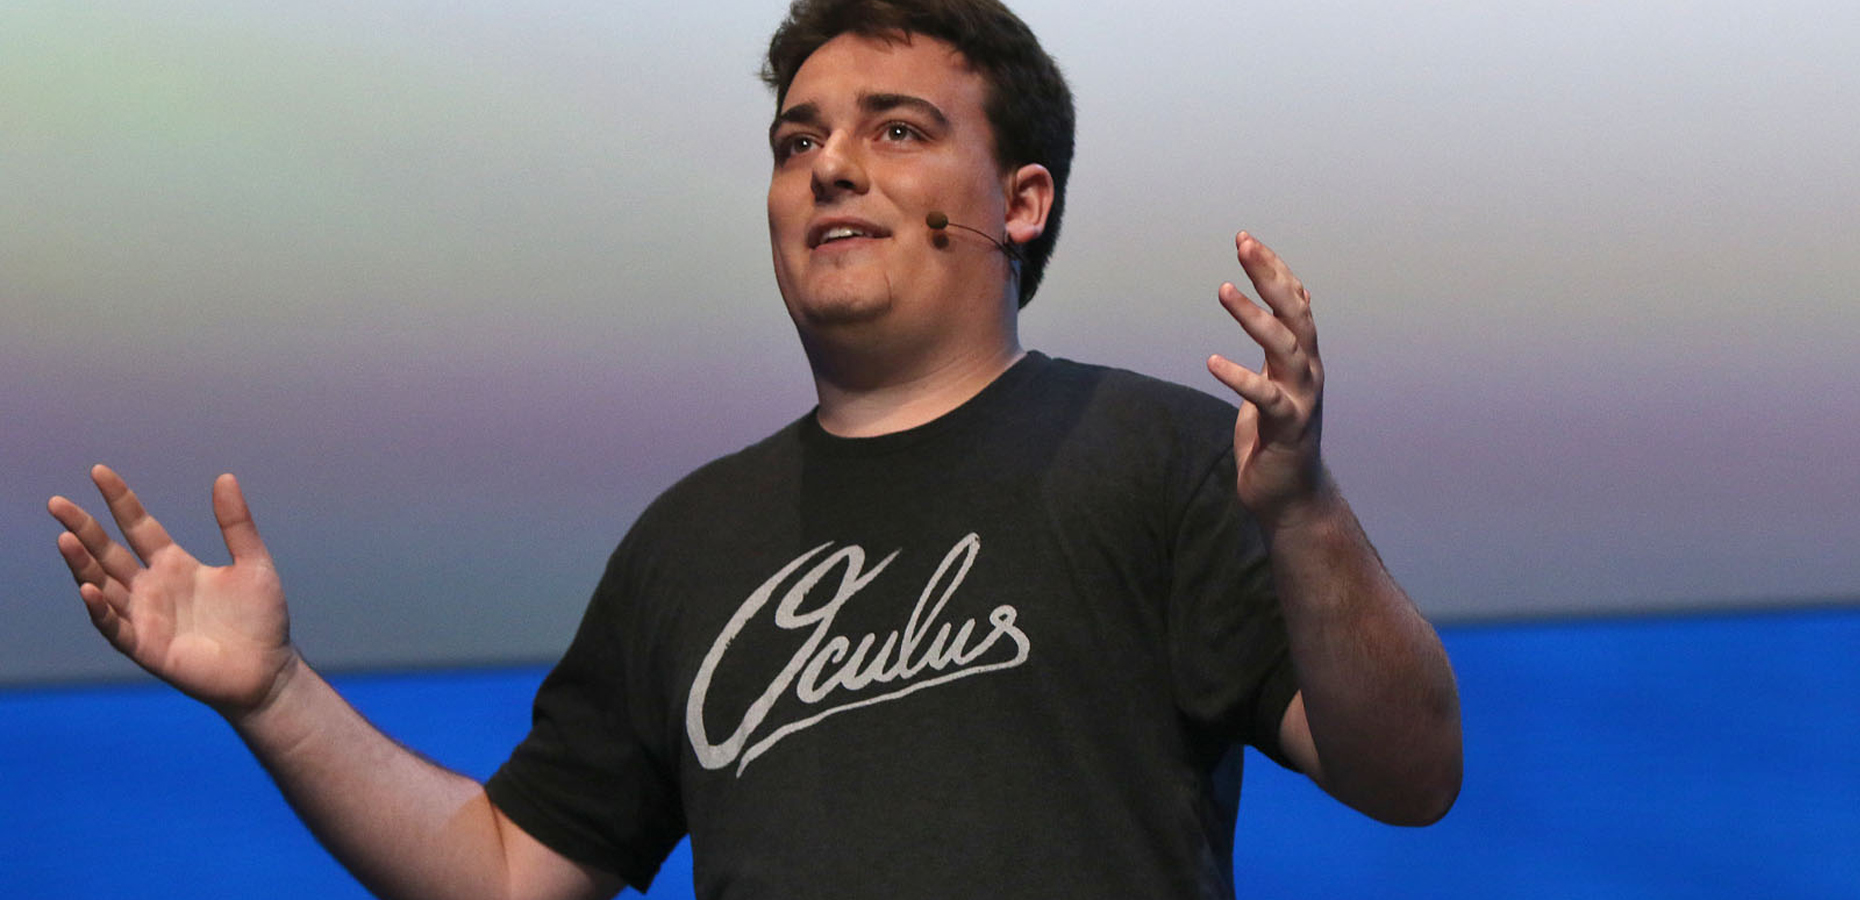 Palmer-Luckey-Founder-at-Oculus-5